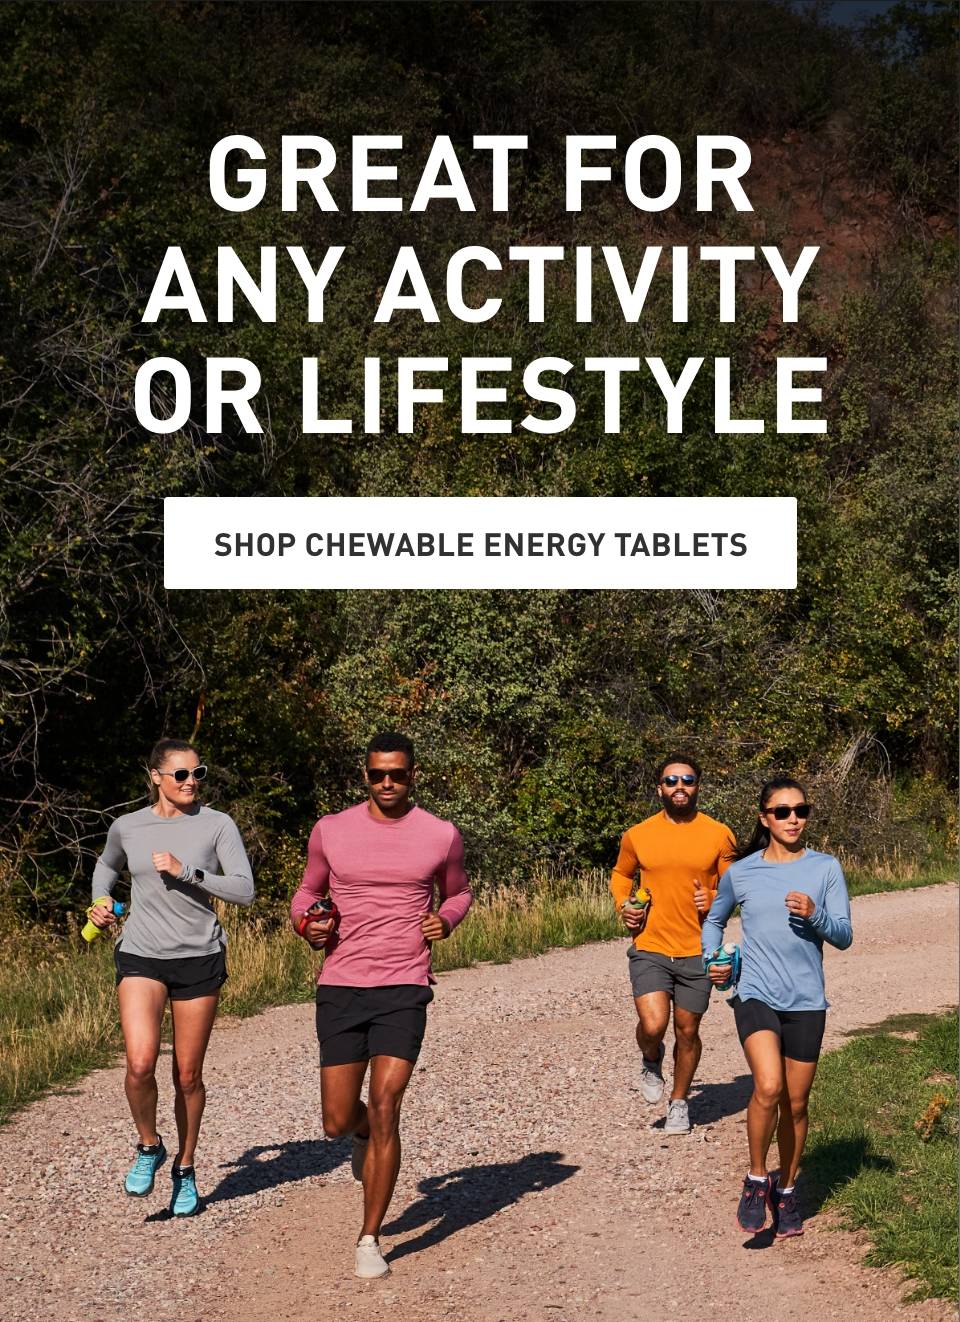 Great for any activity or lifestyle. Shop chewable energy tablets.